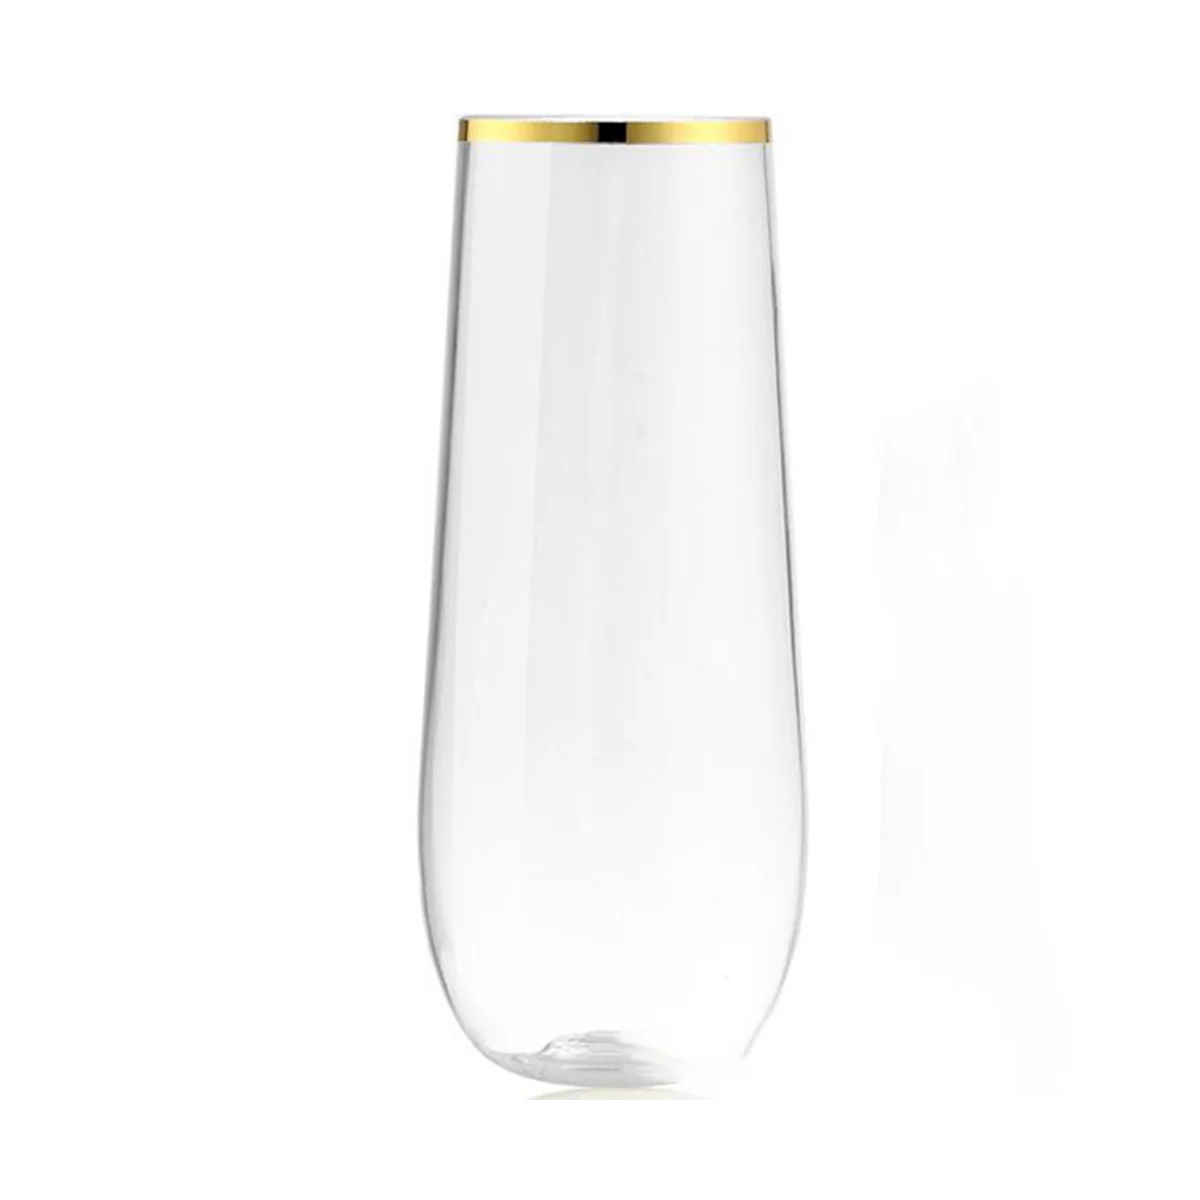 stemless-plastic-champagne-glass-disposable-9-oz-gold-rim-clear-plastic-toasting-glasses-shatterproof-recyclable